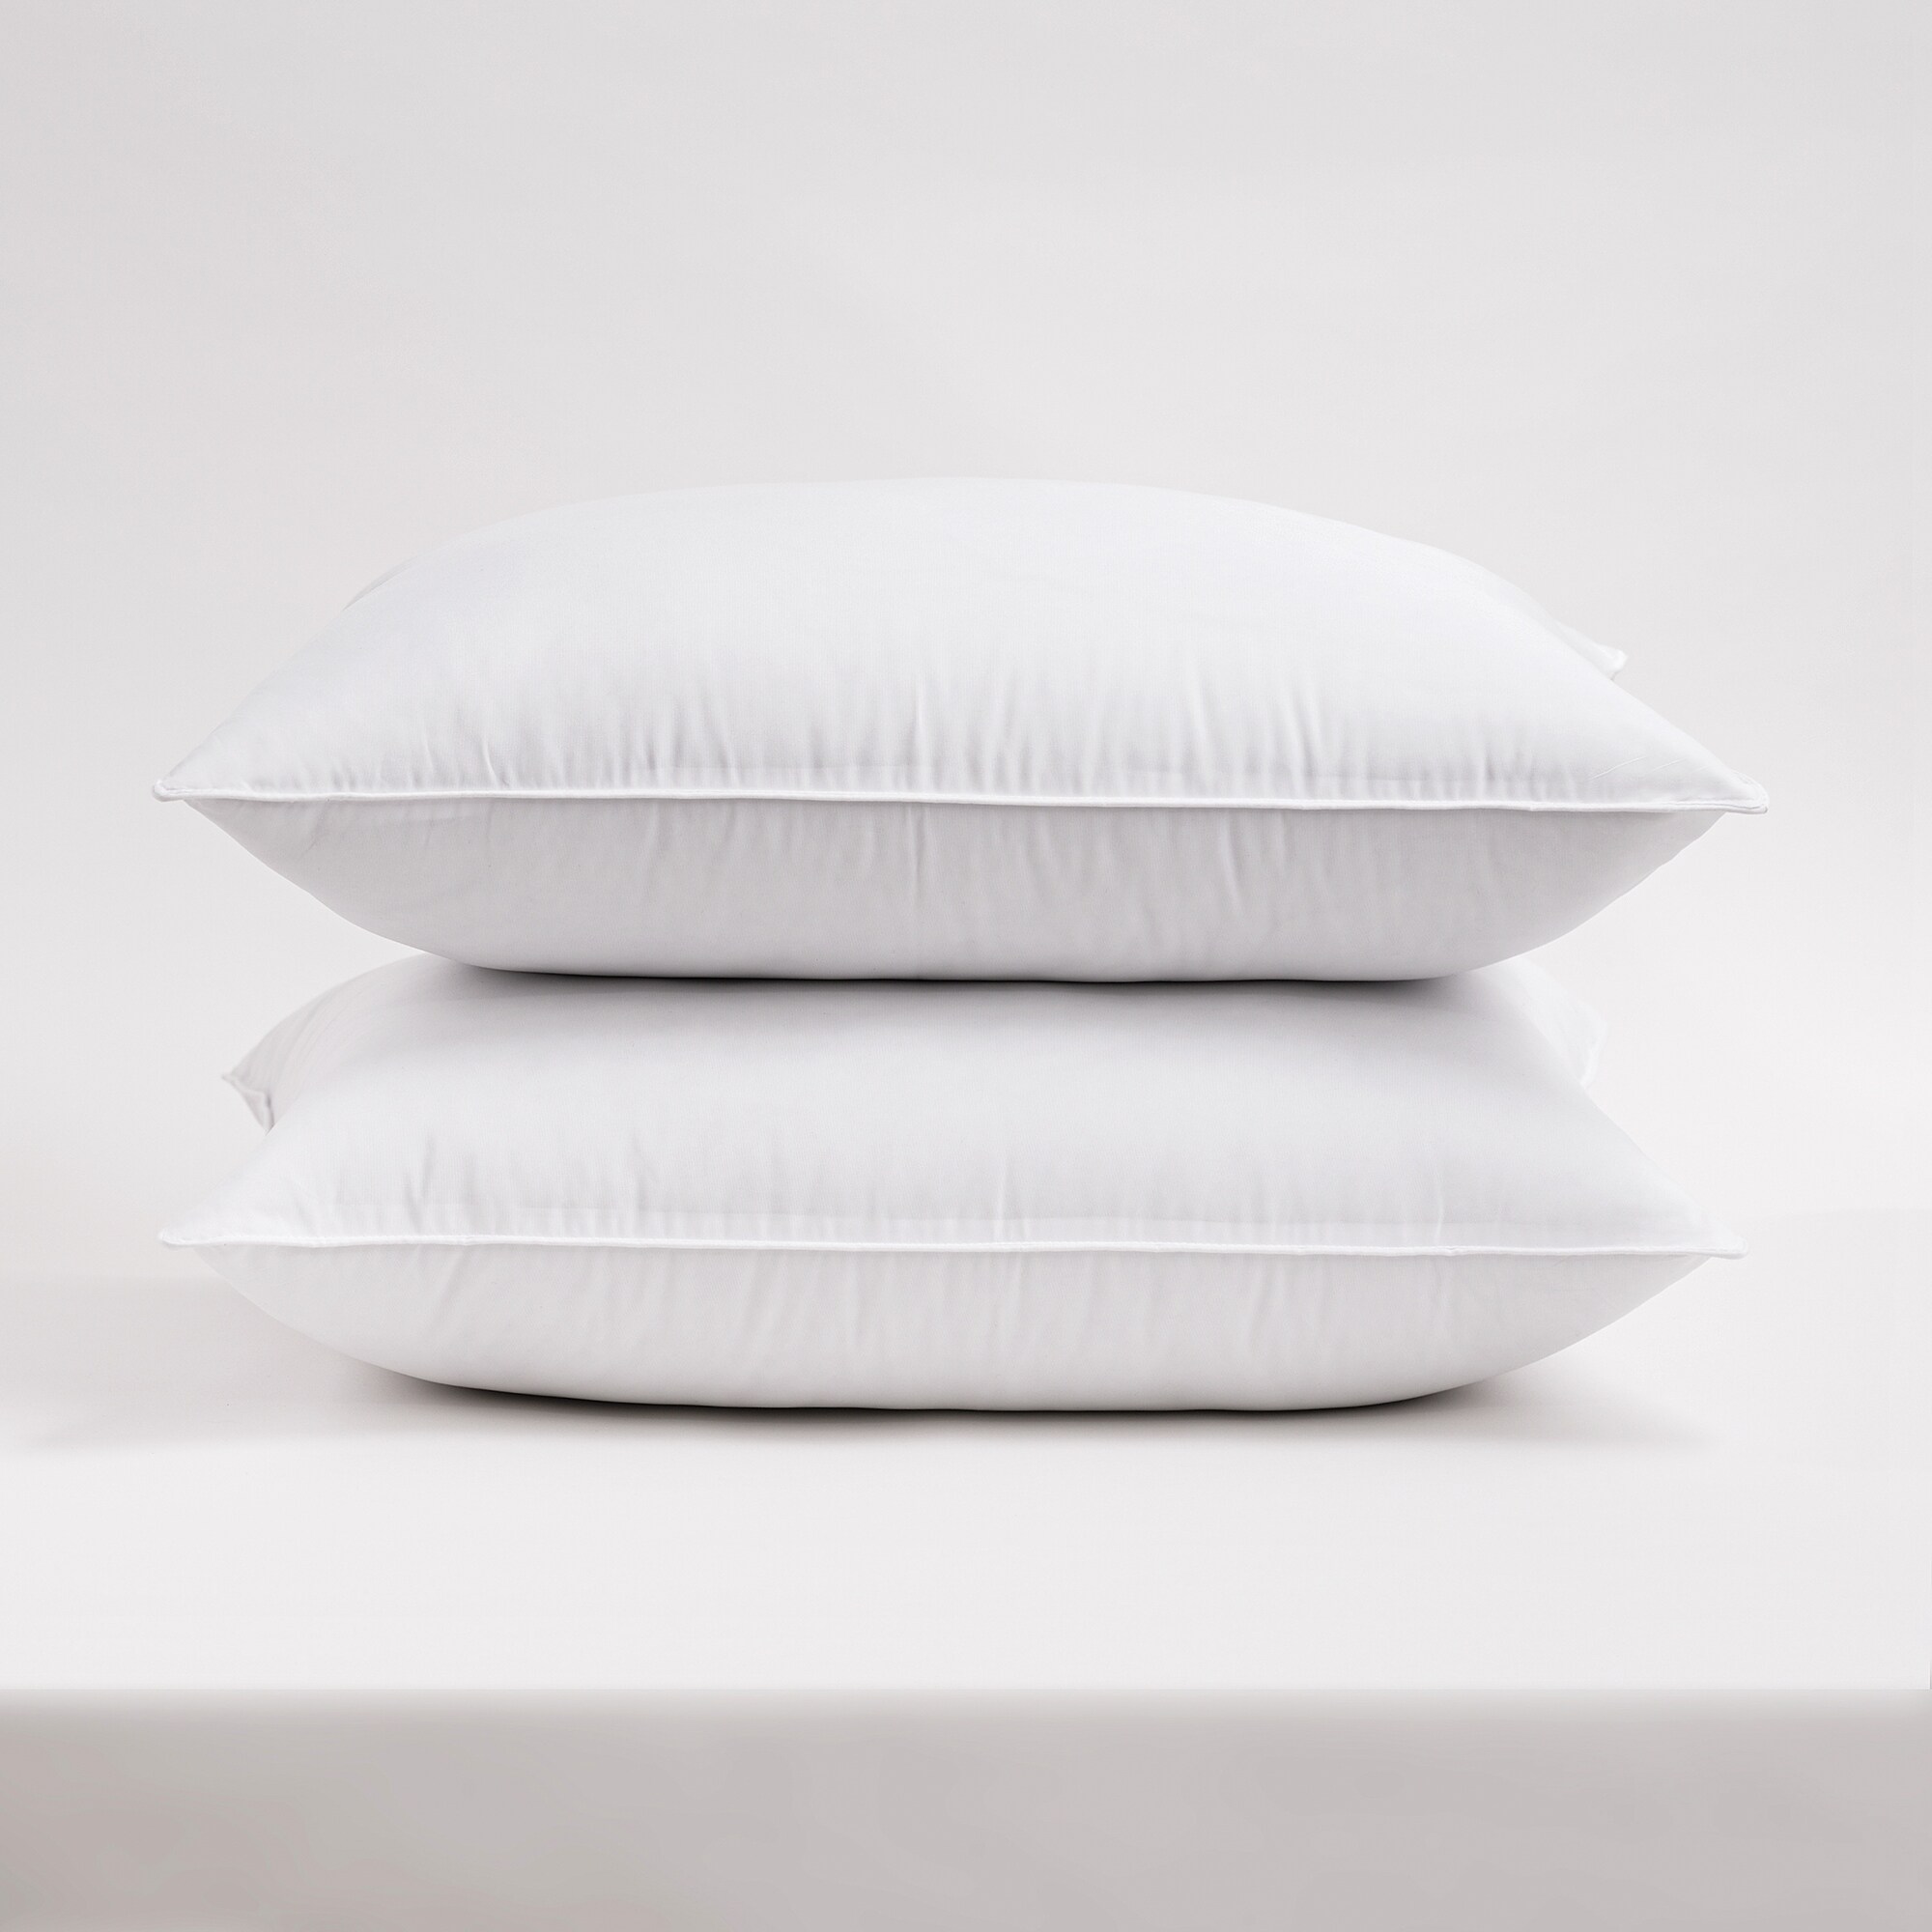 220 Thread Count Pillow Hotel Collection by Cozy Classics - White